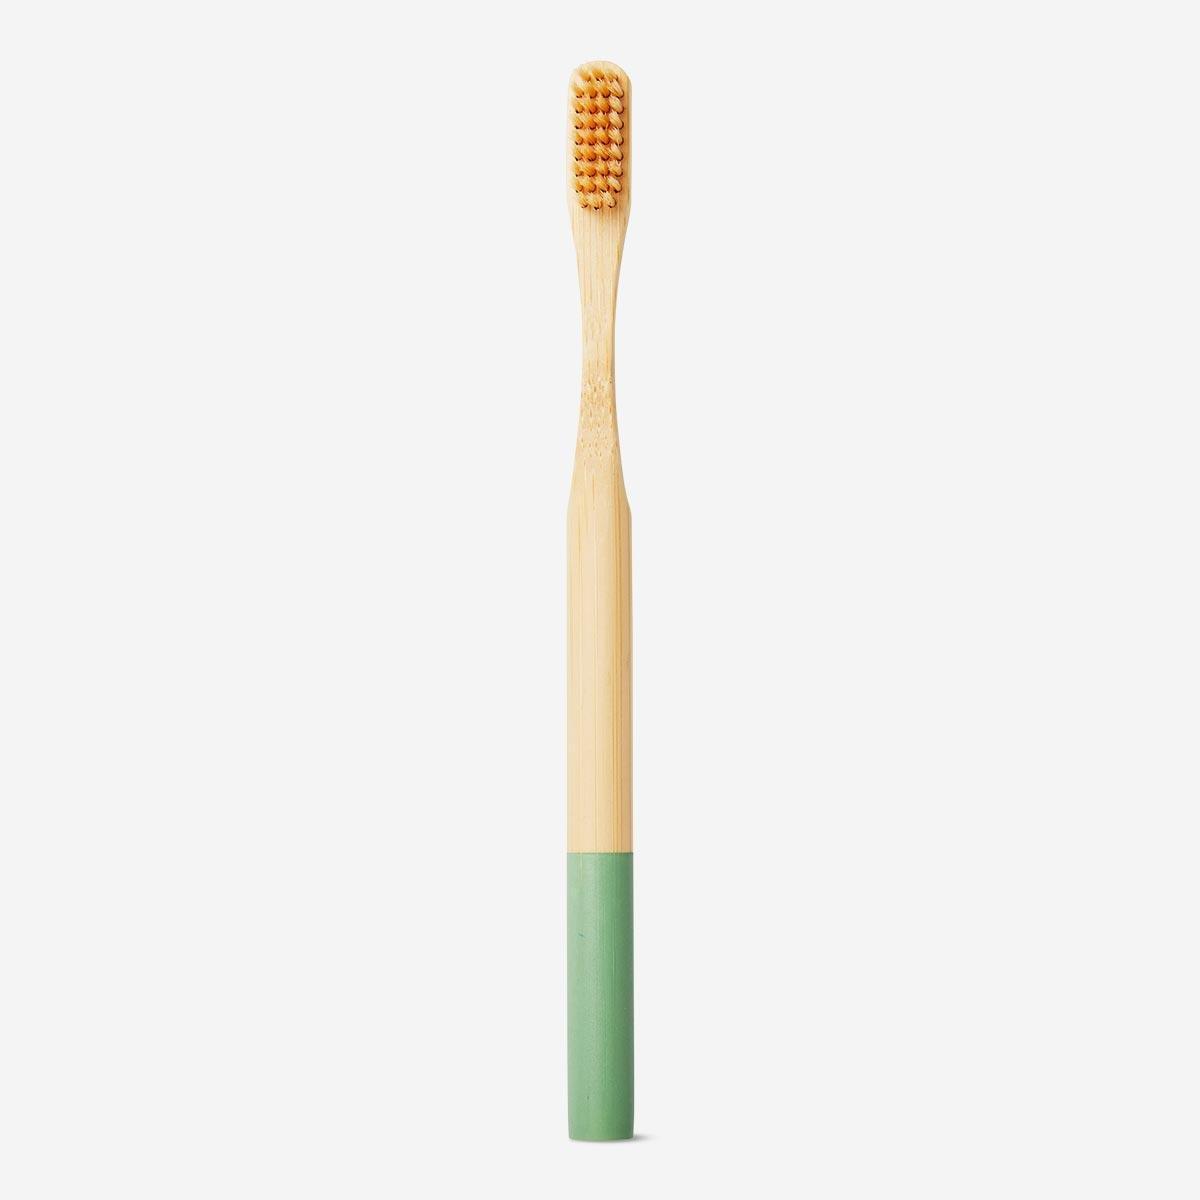 Wooden turquoise toothbrush